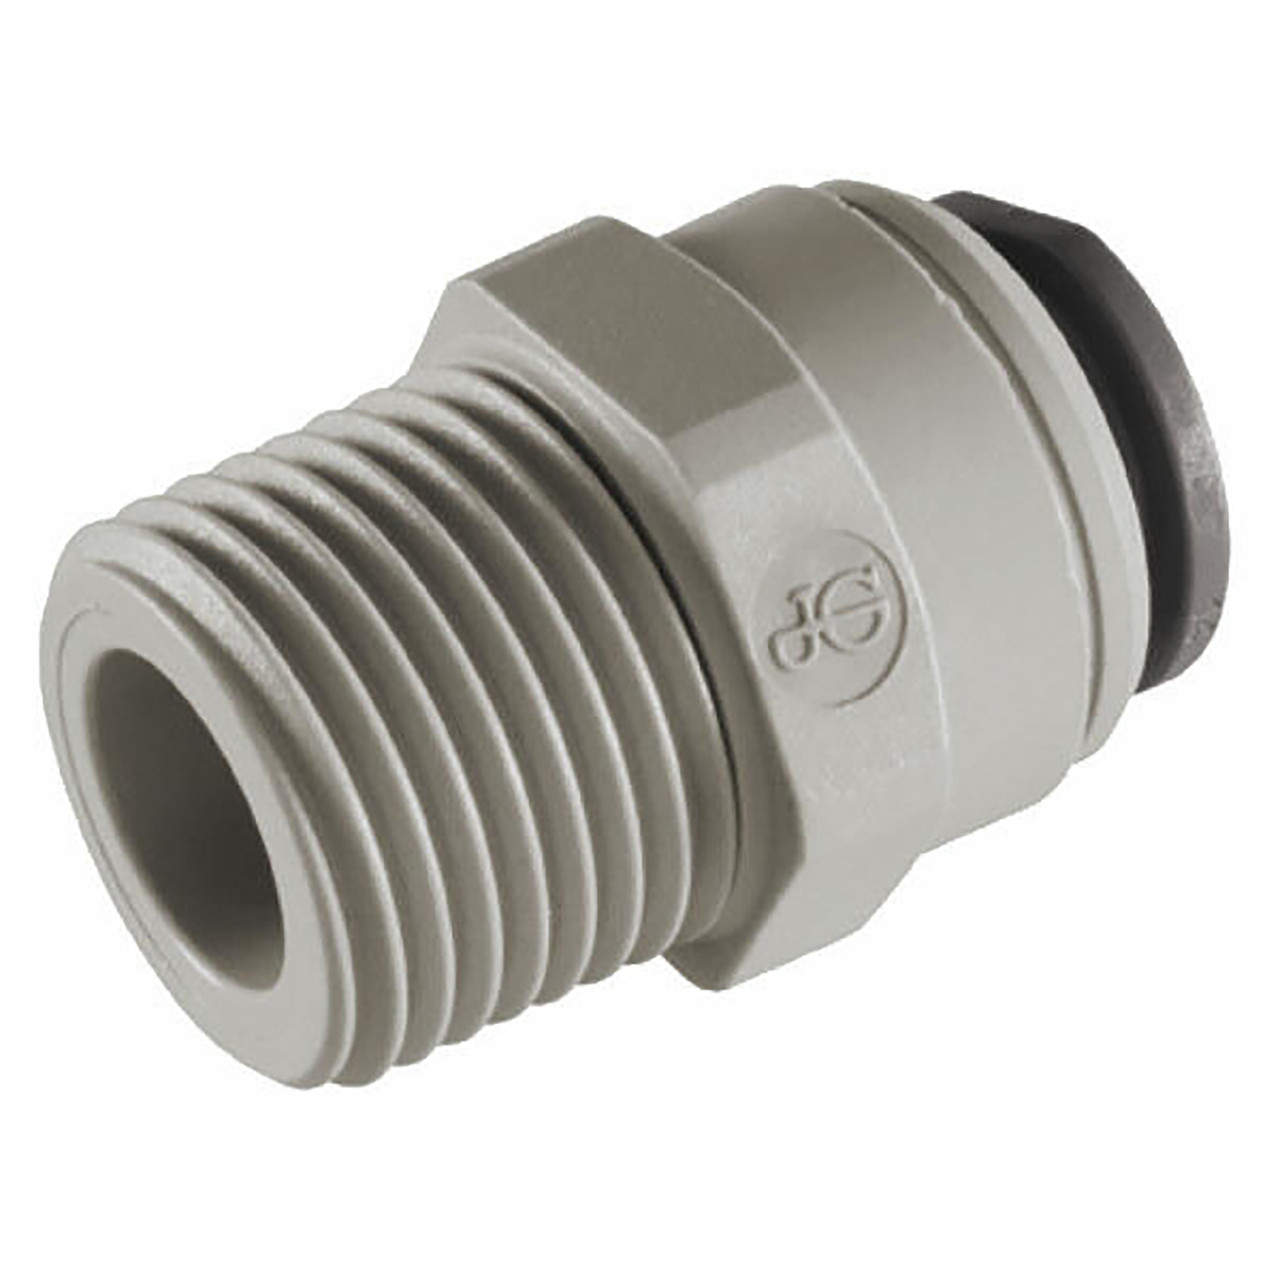 Pack of 10 John Guest PI011223S John Guest Threaded Adapters 